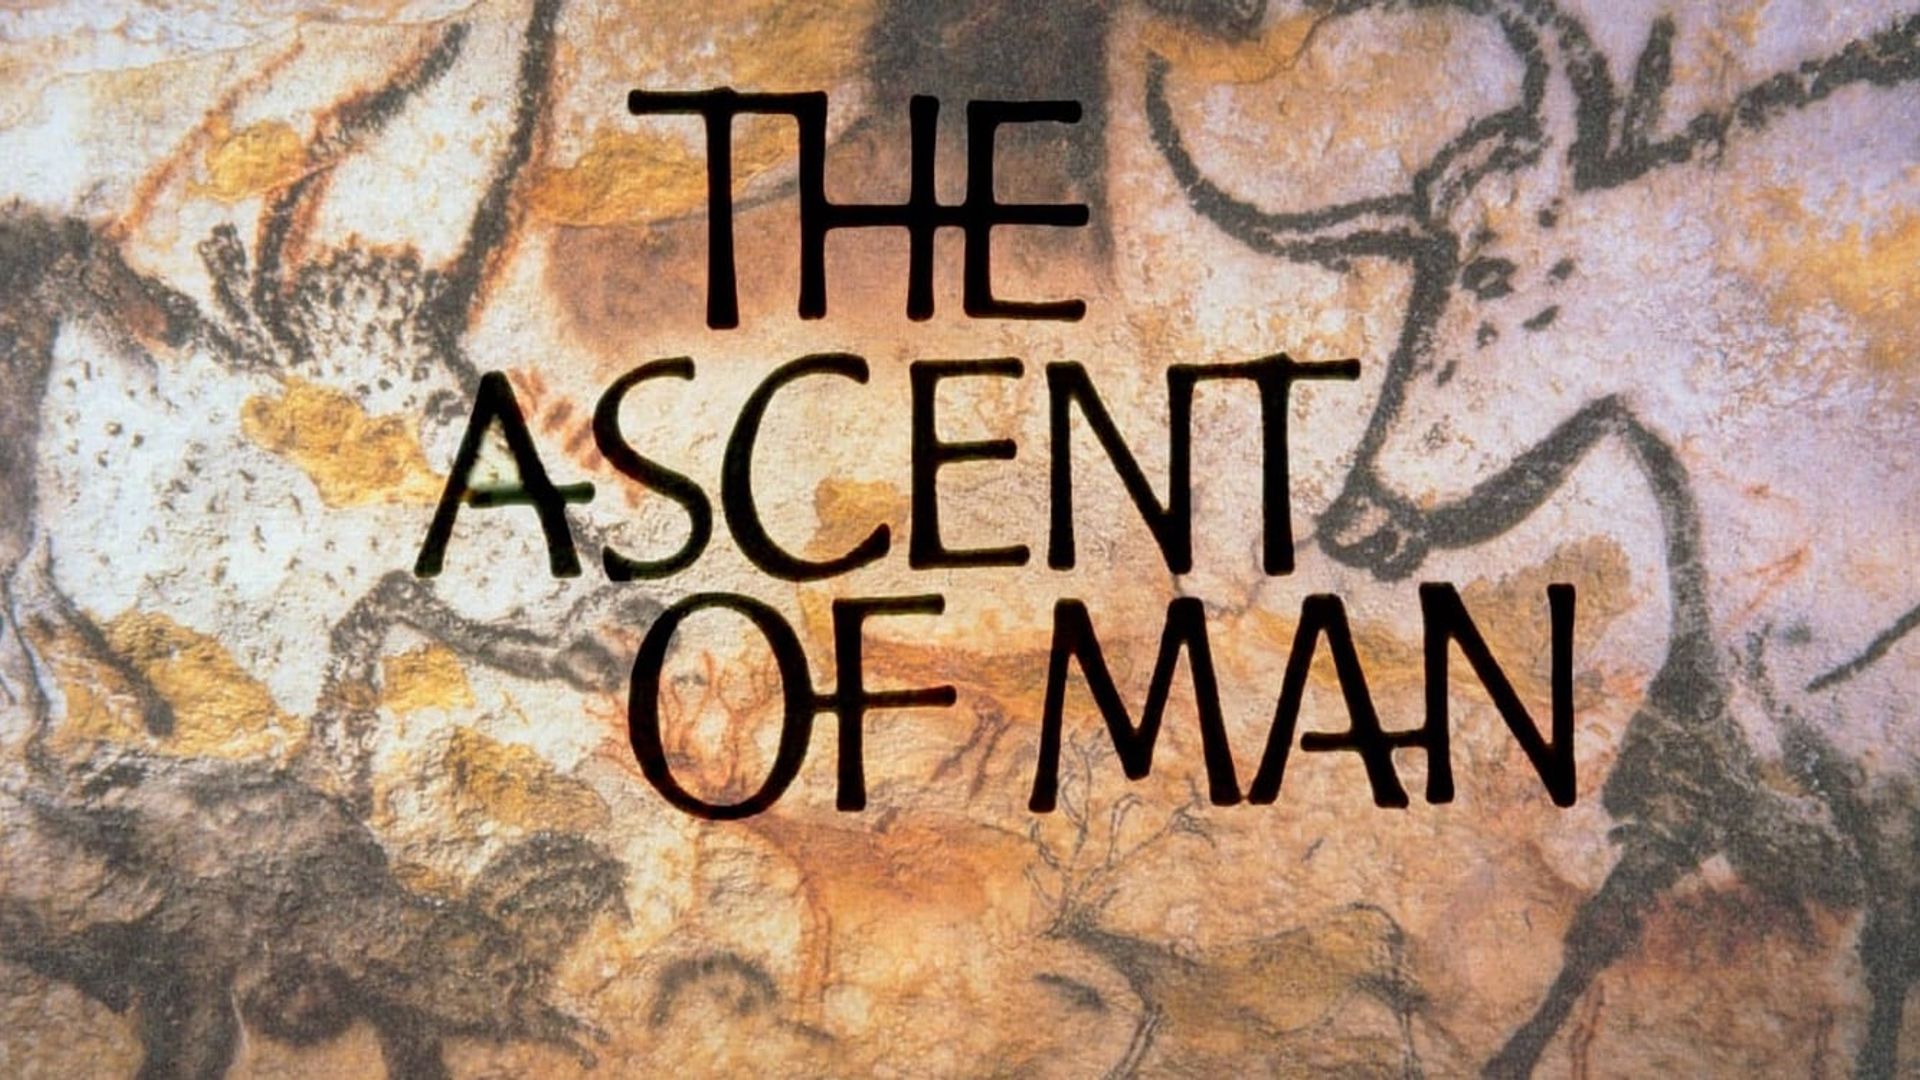 The Ascent of Man background